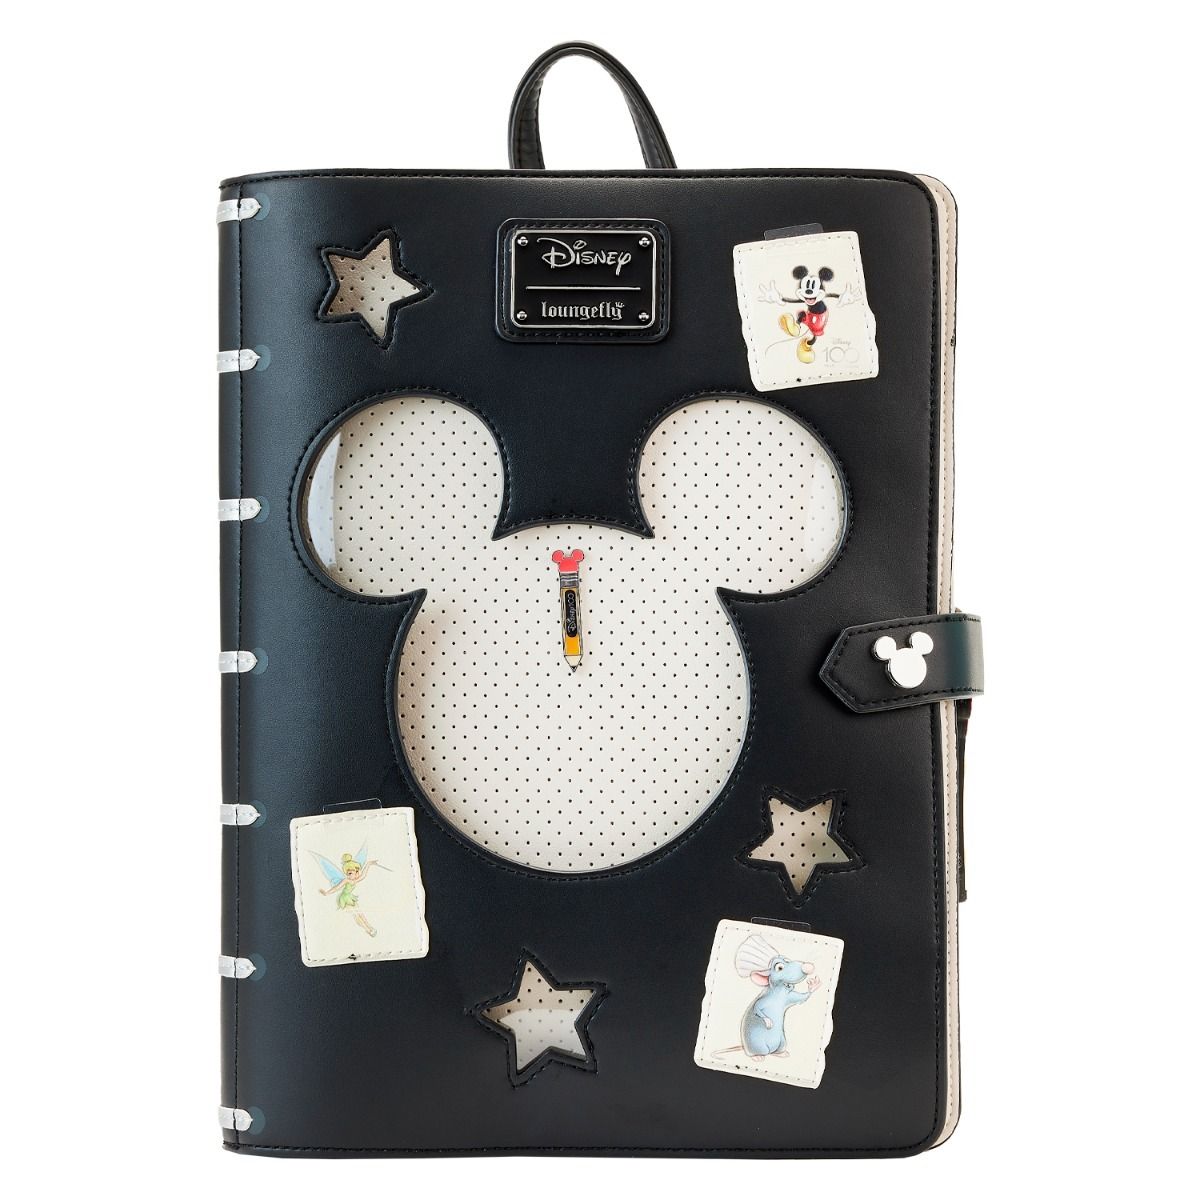 Loungefly Disney Mickey Mouse Head Applique Bag Strap